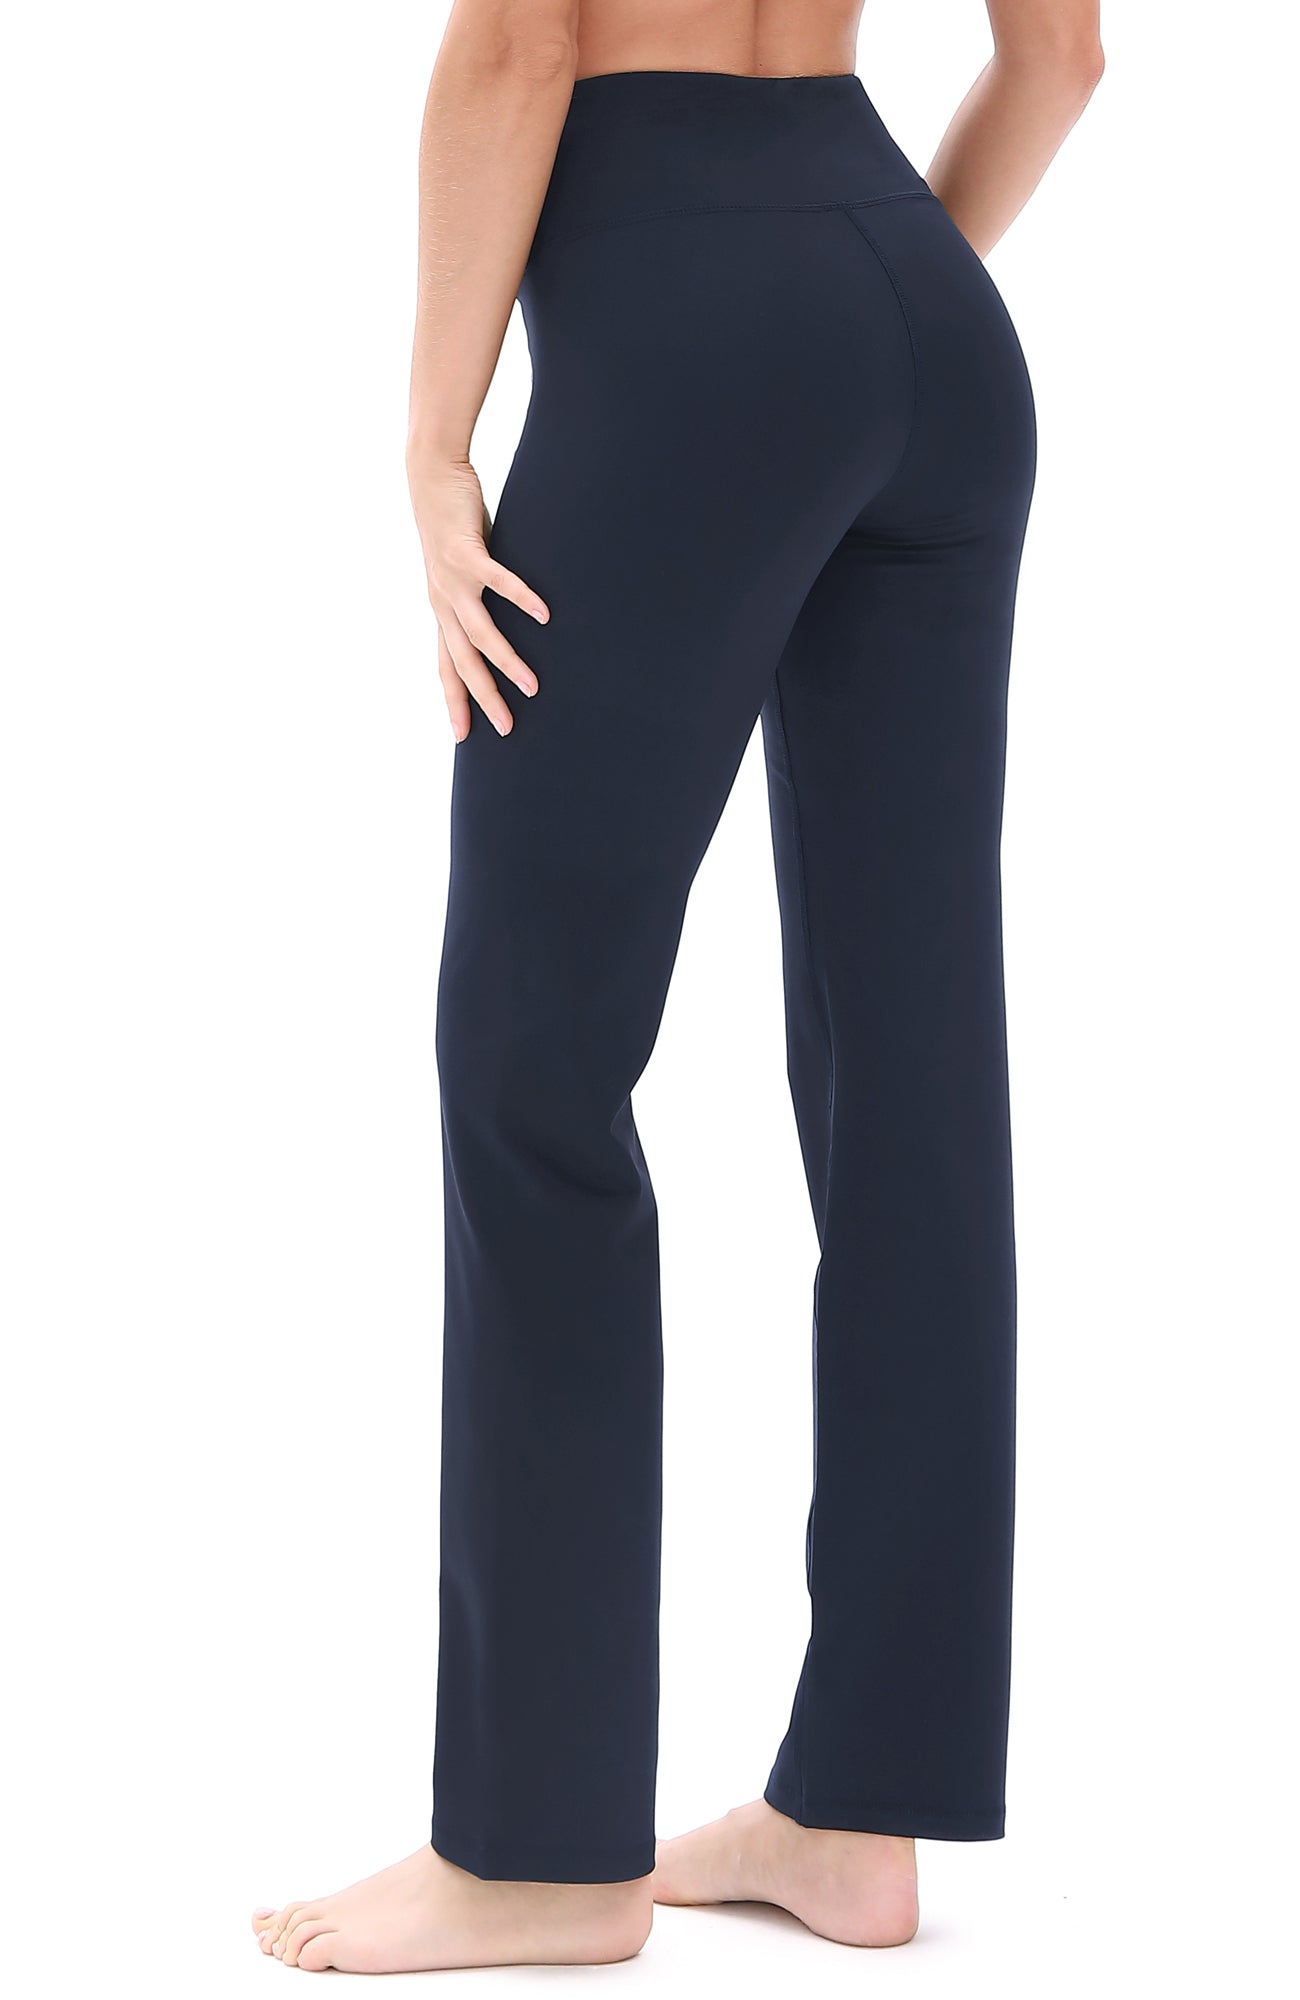 P43 icyzone Bootcut Yoga Pants for Women - Tummy Control Workout